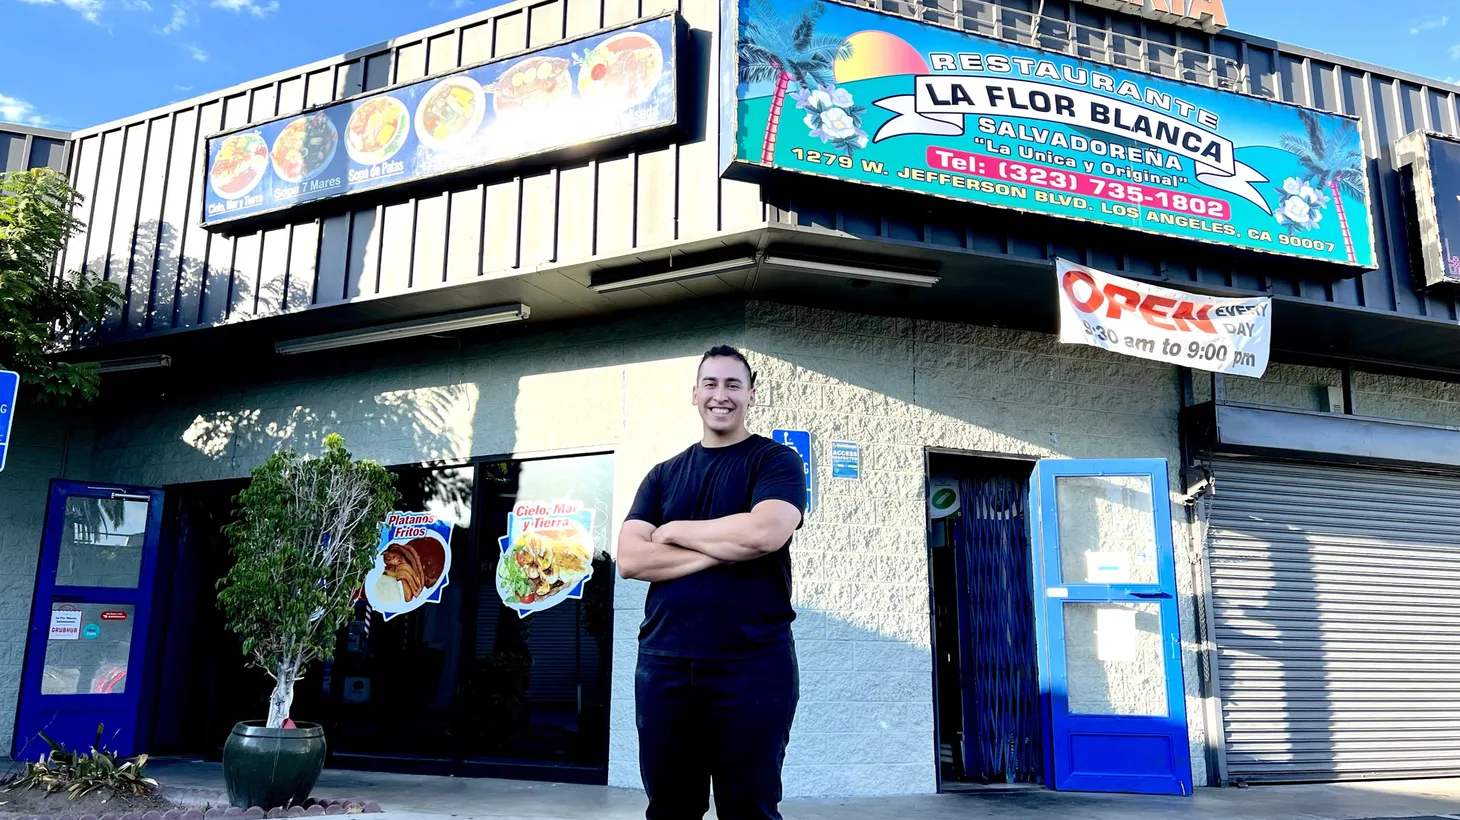 “He relied on his charisma and personality,” says Alexis Navarette of his father, who opened his El Salvadoran restaurant in South LA prior to social media and gentrification.